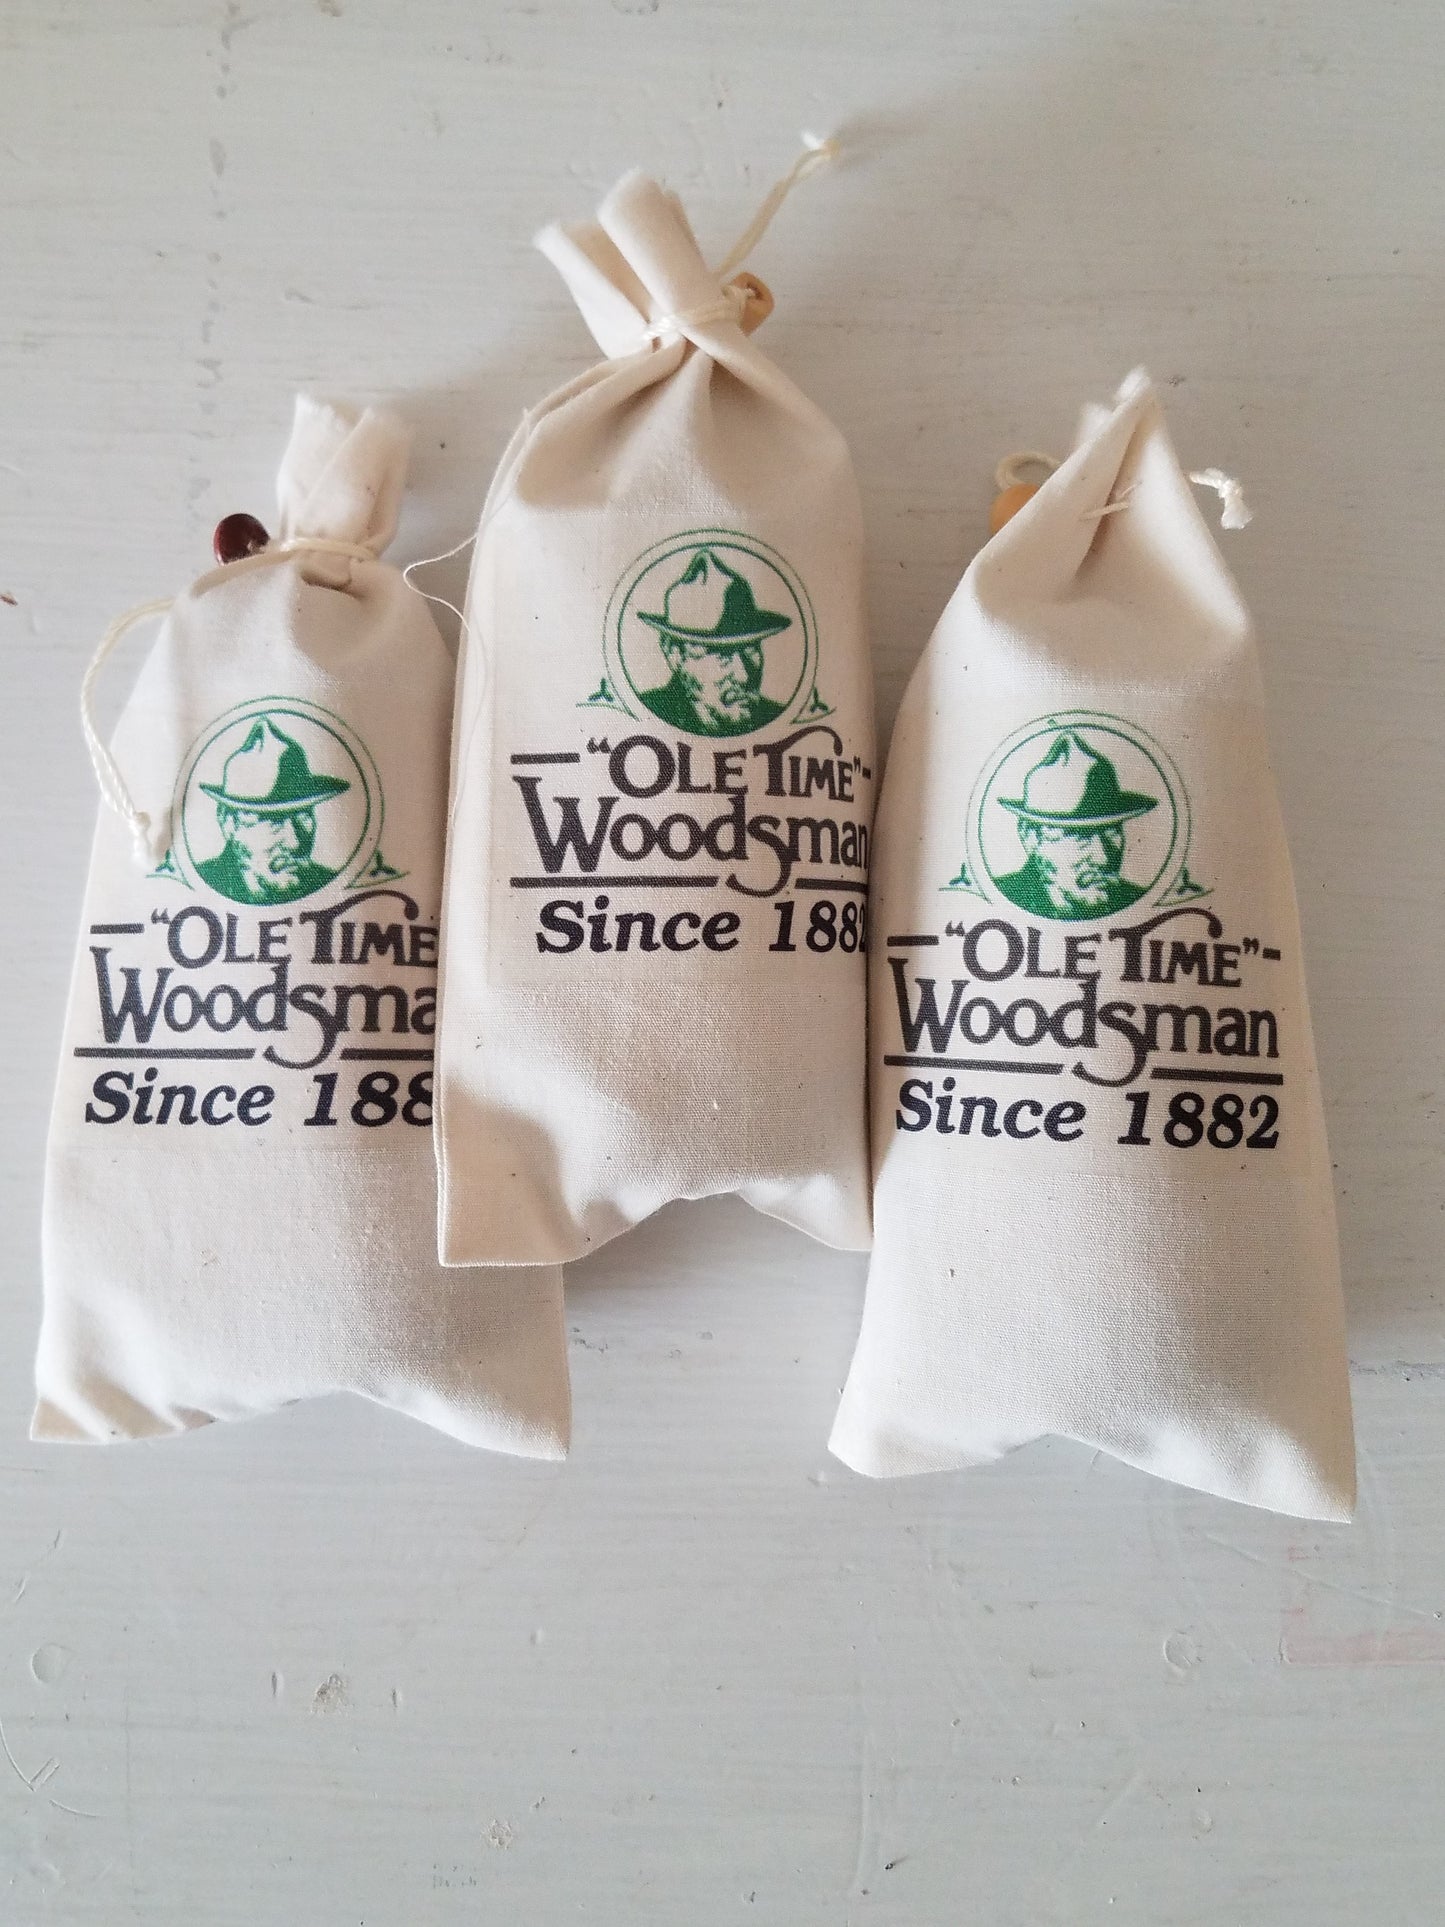 Ole Time Woodsman FLY DOPE Insect Repellent THREE BOTTLES Value Pack (Free Shipping USA) - Ole Time Woodsman Fly Dope "Since 1882, The World's First and Best Protection Against All Biting Insects!"